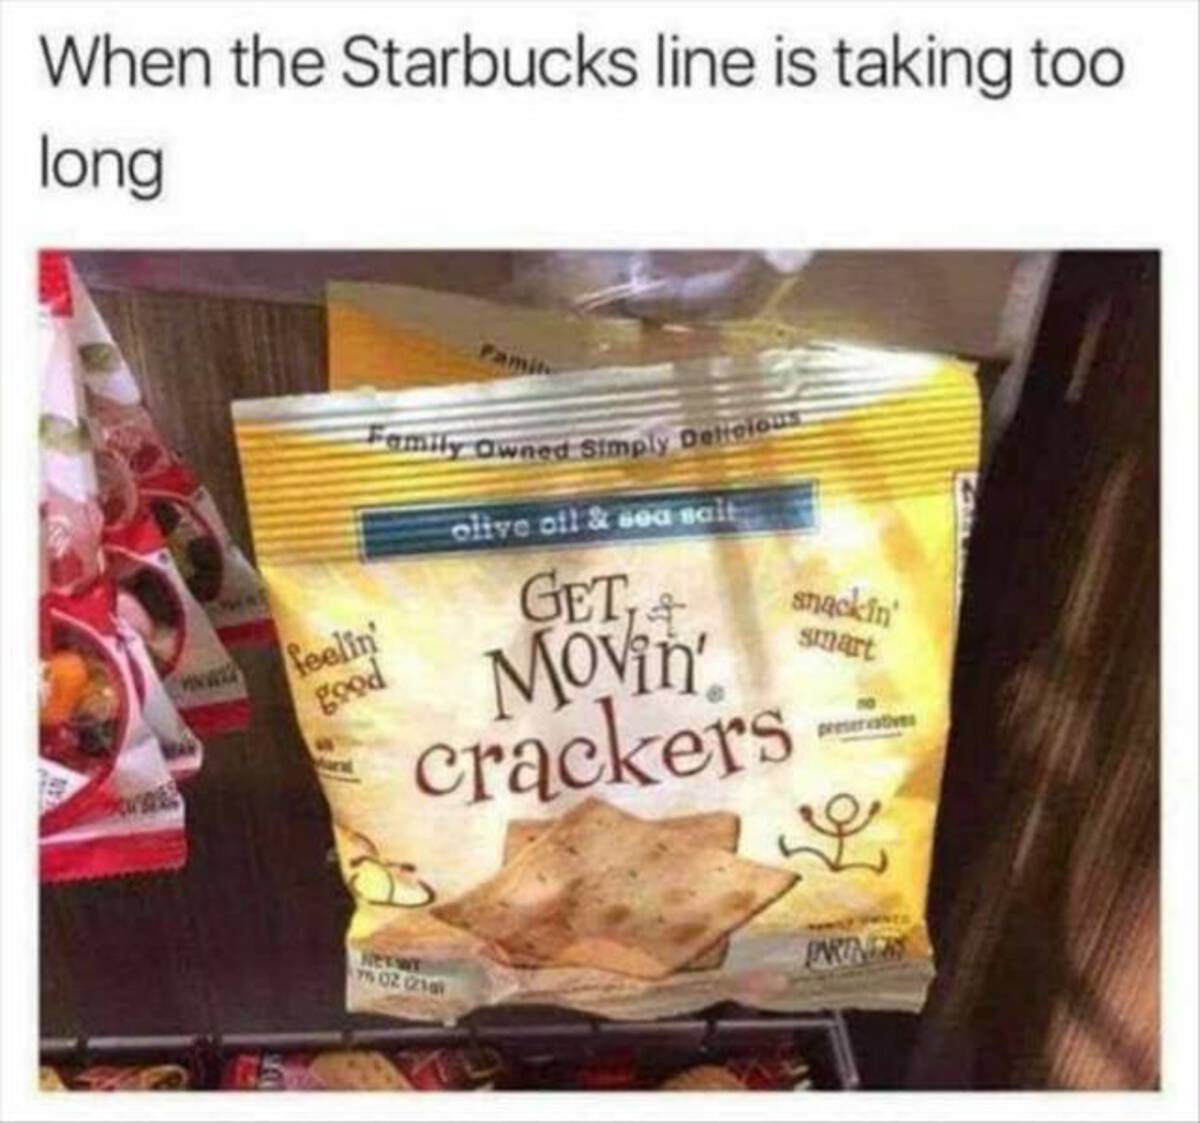 keep it moving crackers - When the Starbucks line is taking too long Family Owned Simply Detroious olive oil & sea salt Get, & Movin crackers feelin' good Ctwt 7502 218 snackin' smart Partners